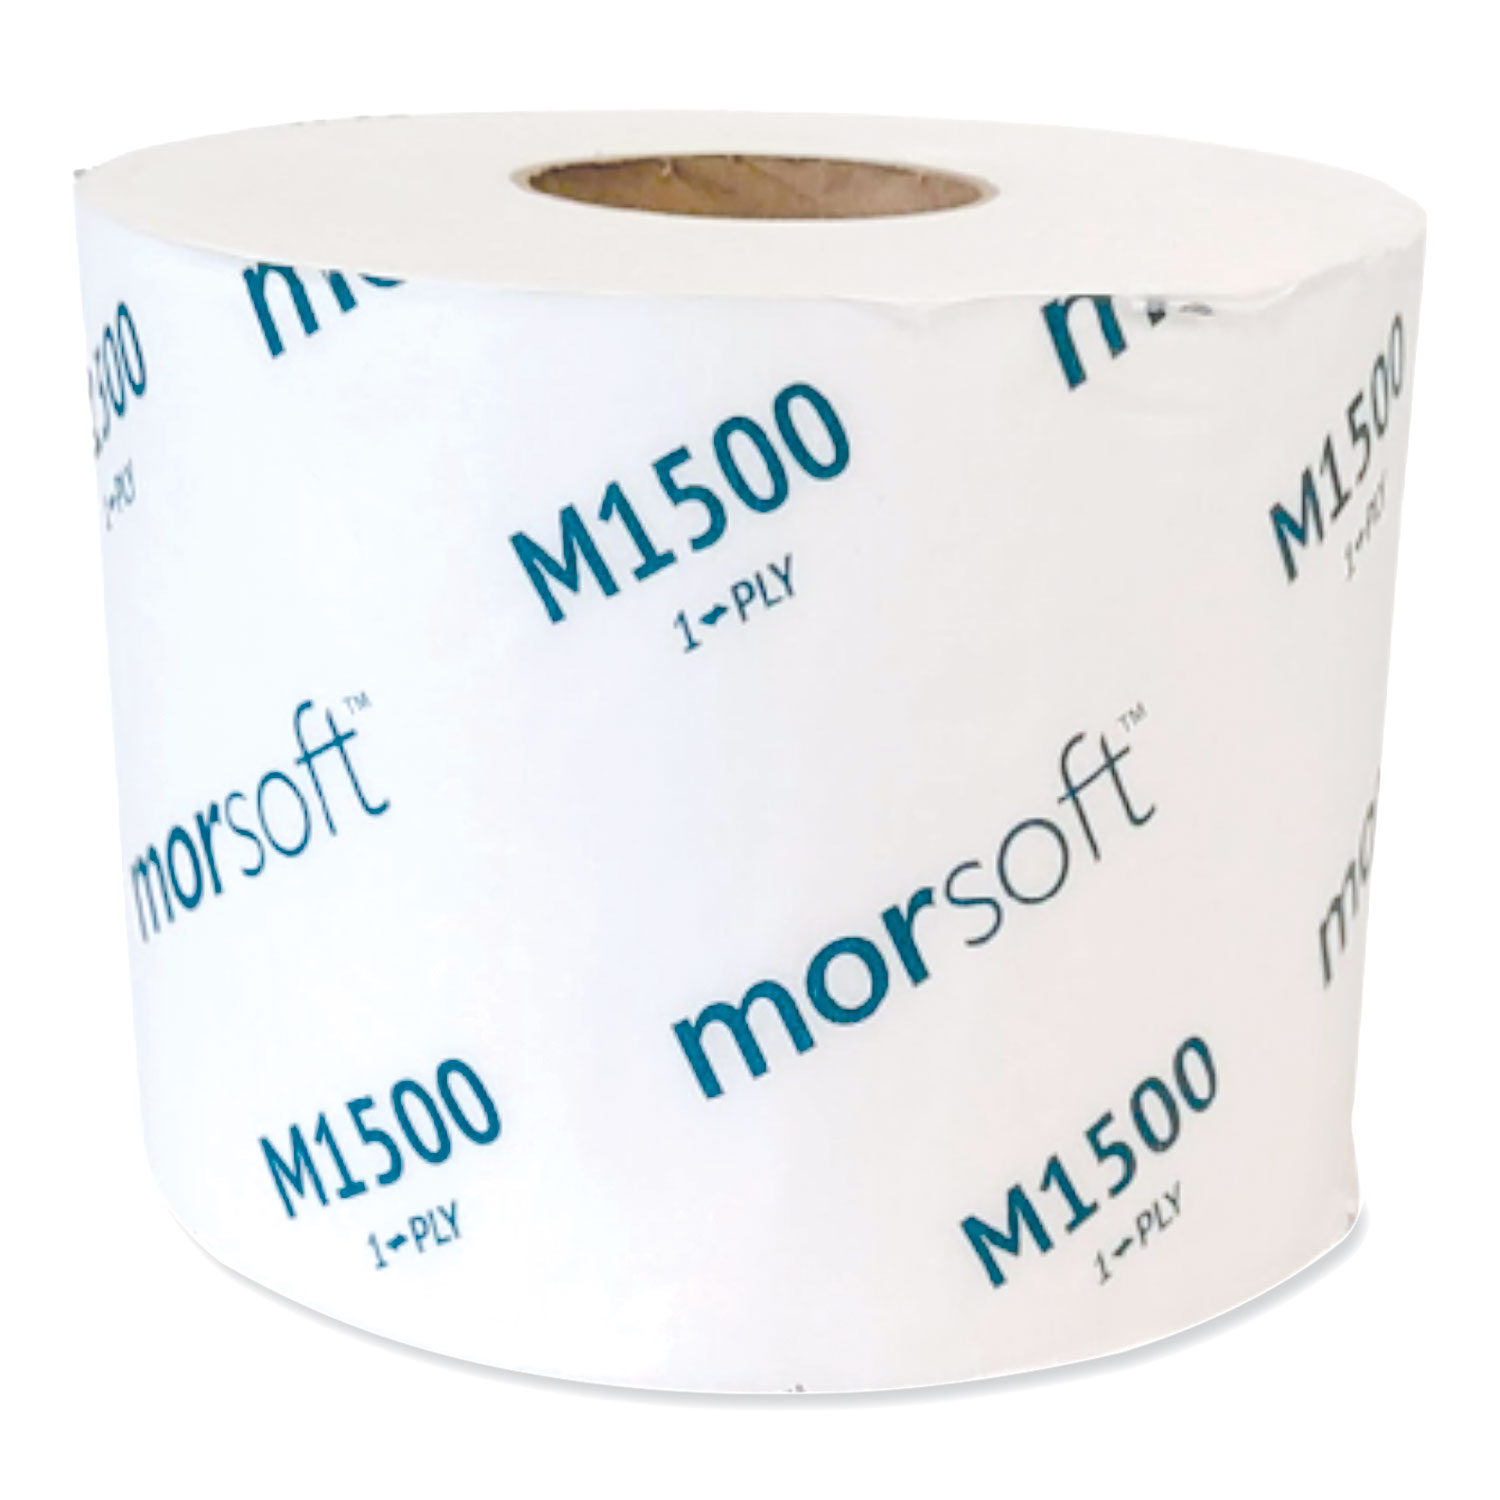 Morcon Tissue Morsoft Controlled Bath Tissue, Septic Safe, 1-Ply, White, 3.9 x 4, 1,500 Sheets/Roll, 36 Rolls/Carton